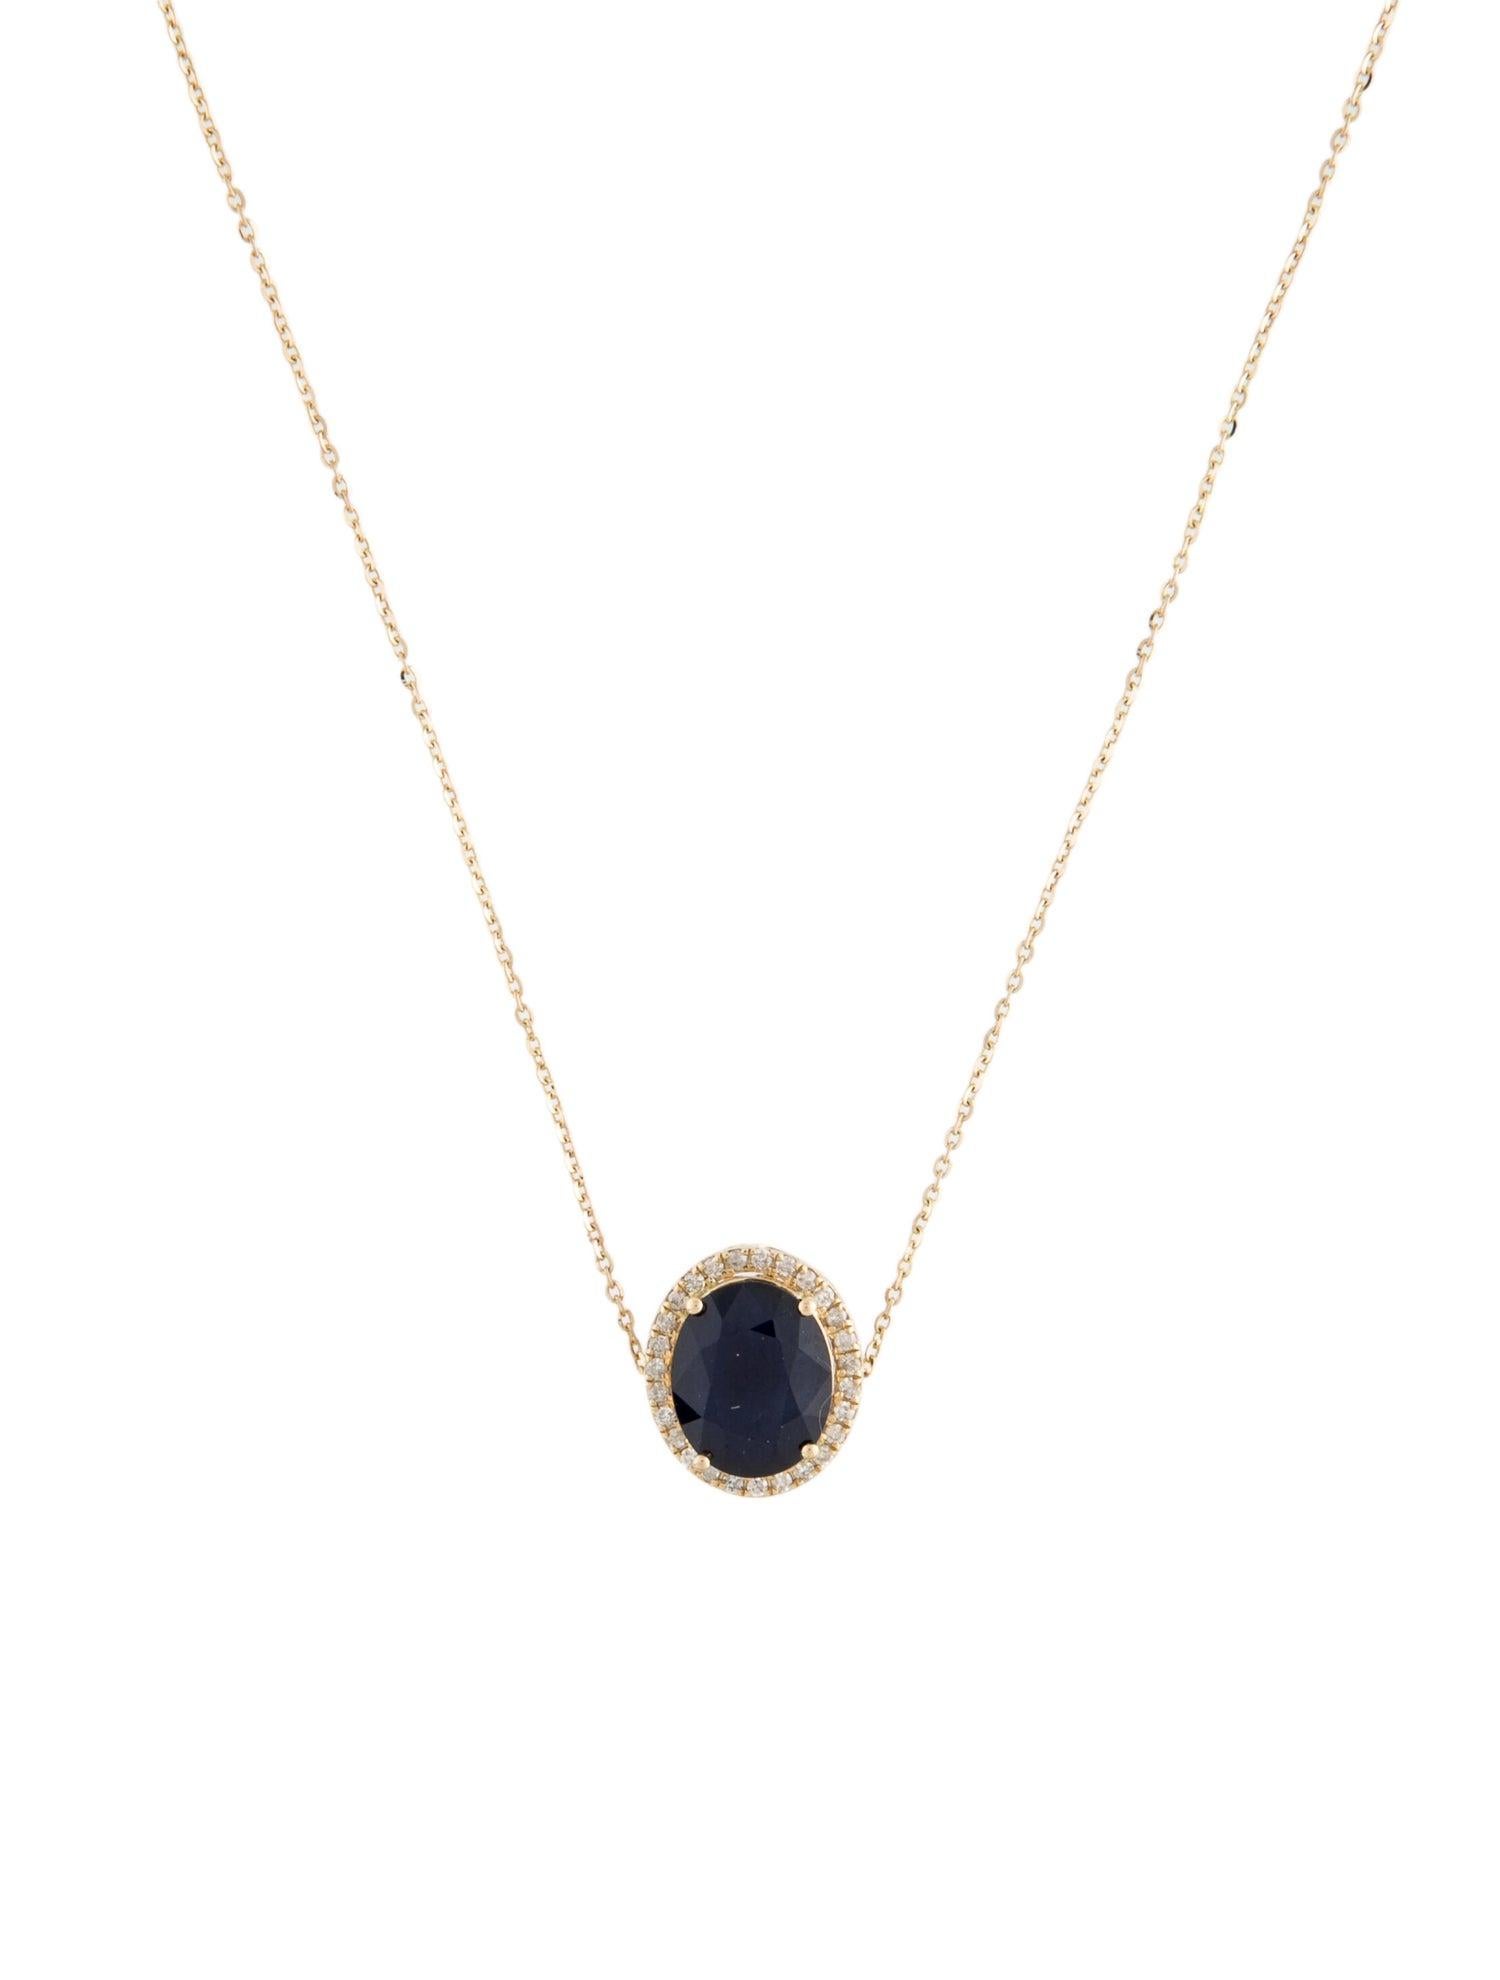 14K 3.30ct Sapphire & Diamond Pendant Necklace - Elegant Statement Jewelry In New Condition For Sale In Holtsville, NY